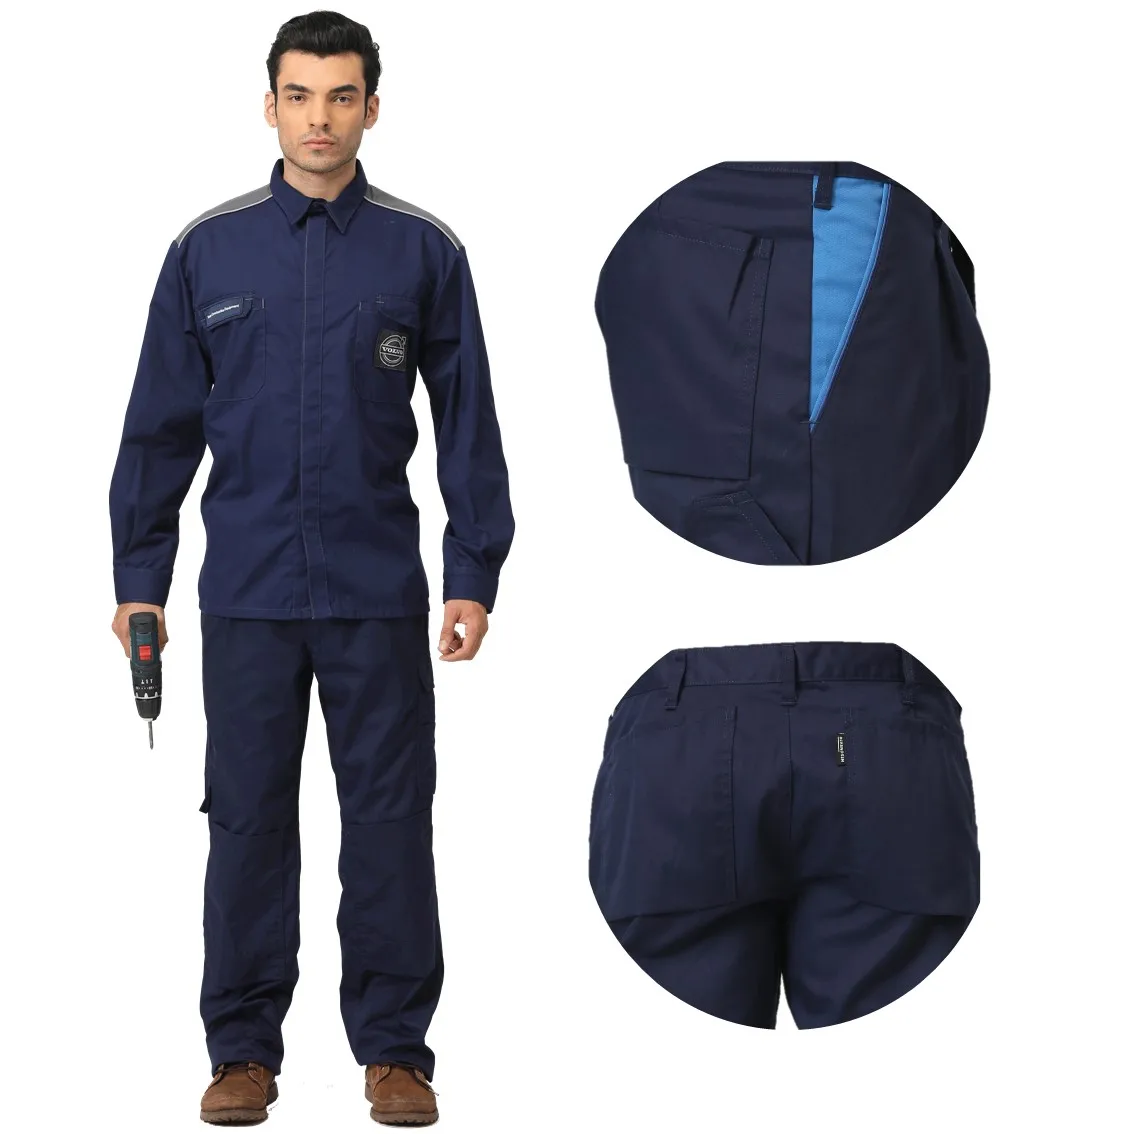 Workers Security Guard Uniform Pants For Welder - Buy Cheap Work ...